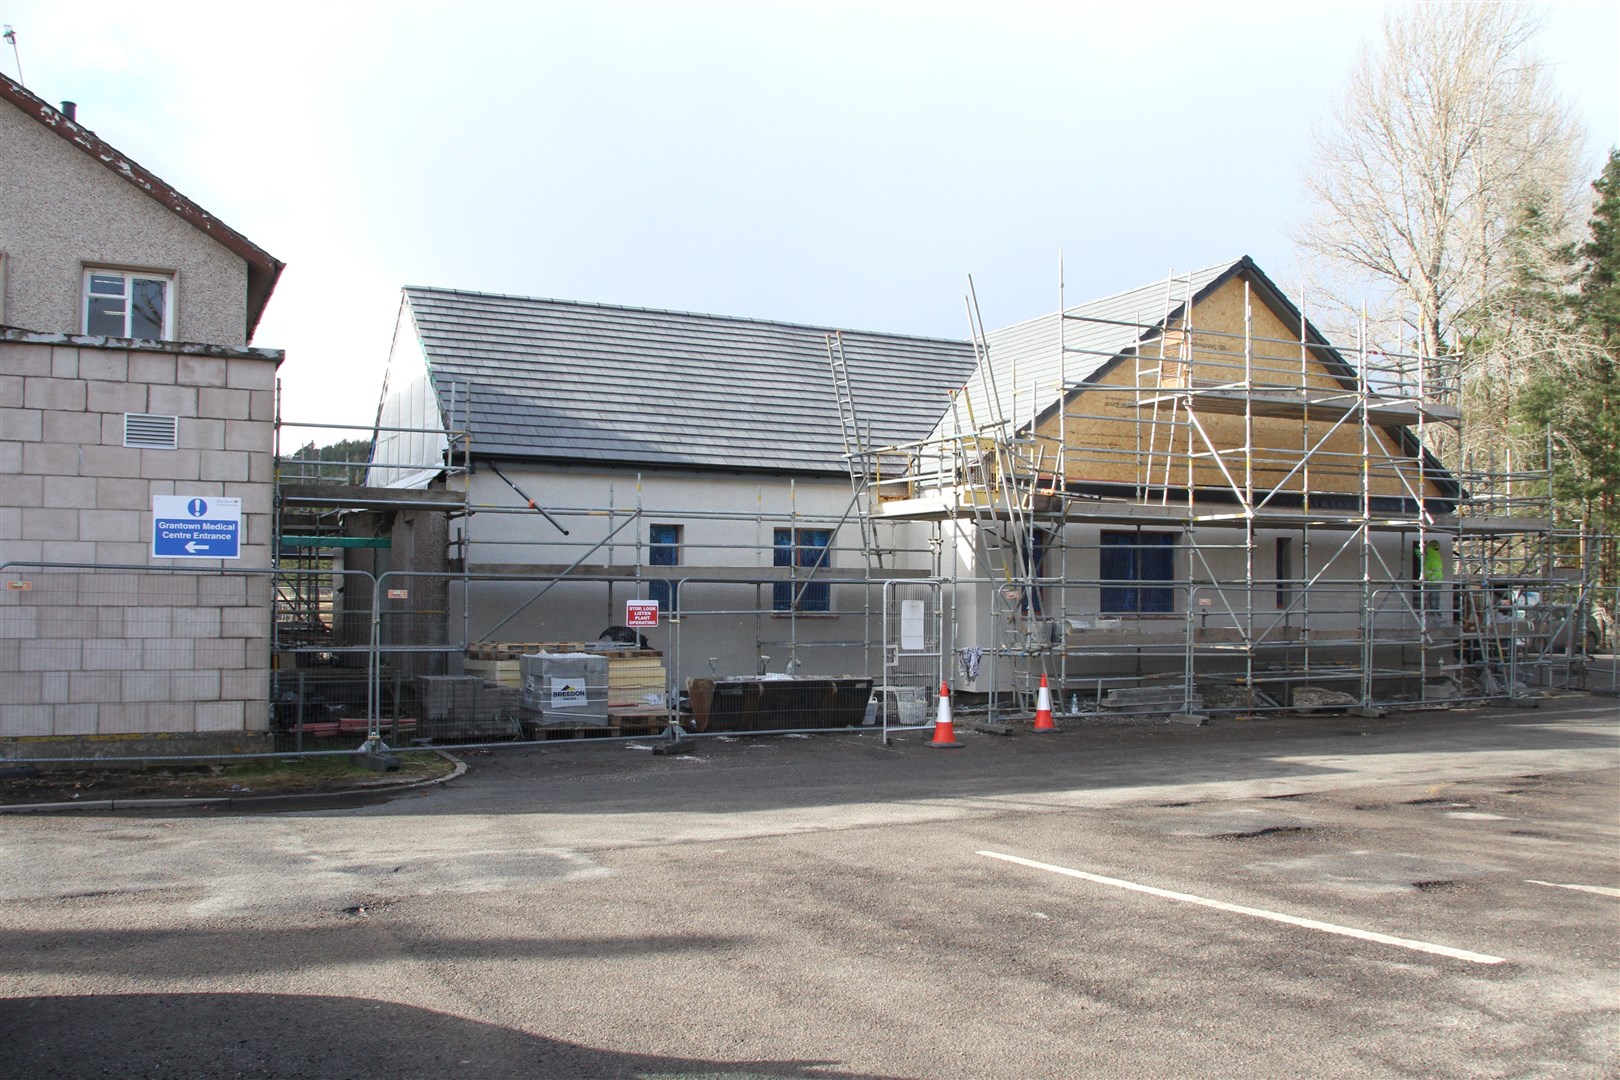 The second phase of improvements to Grantown Health Centre - promised as part of a major overhaul of local health services - has been put on hold.